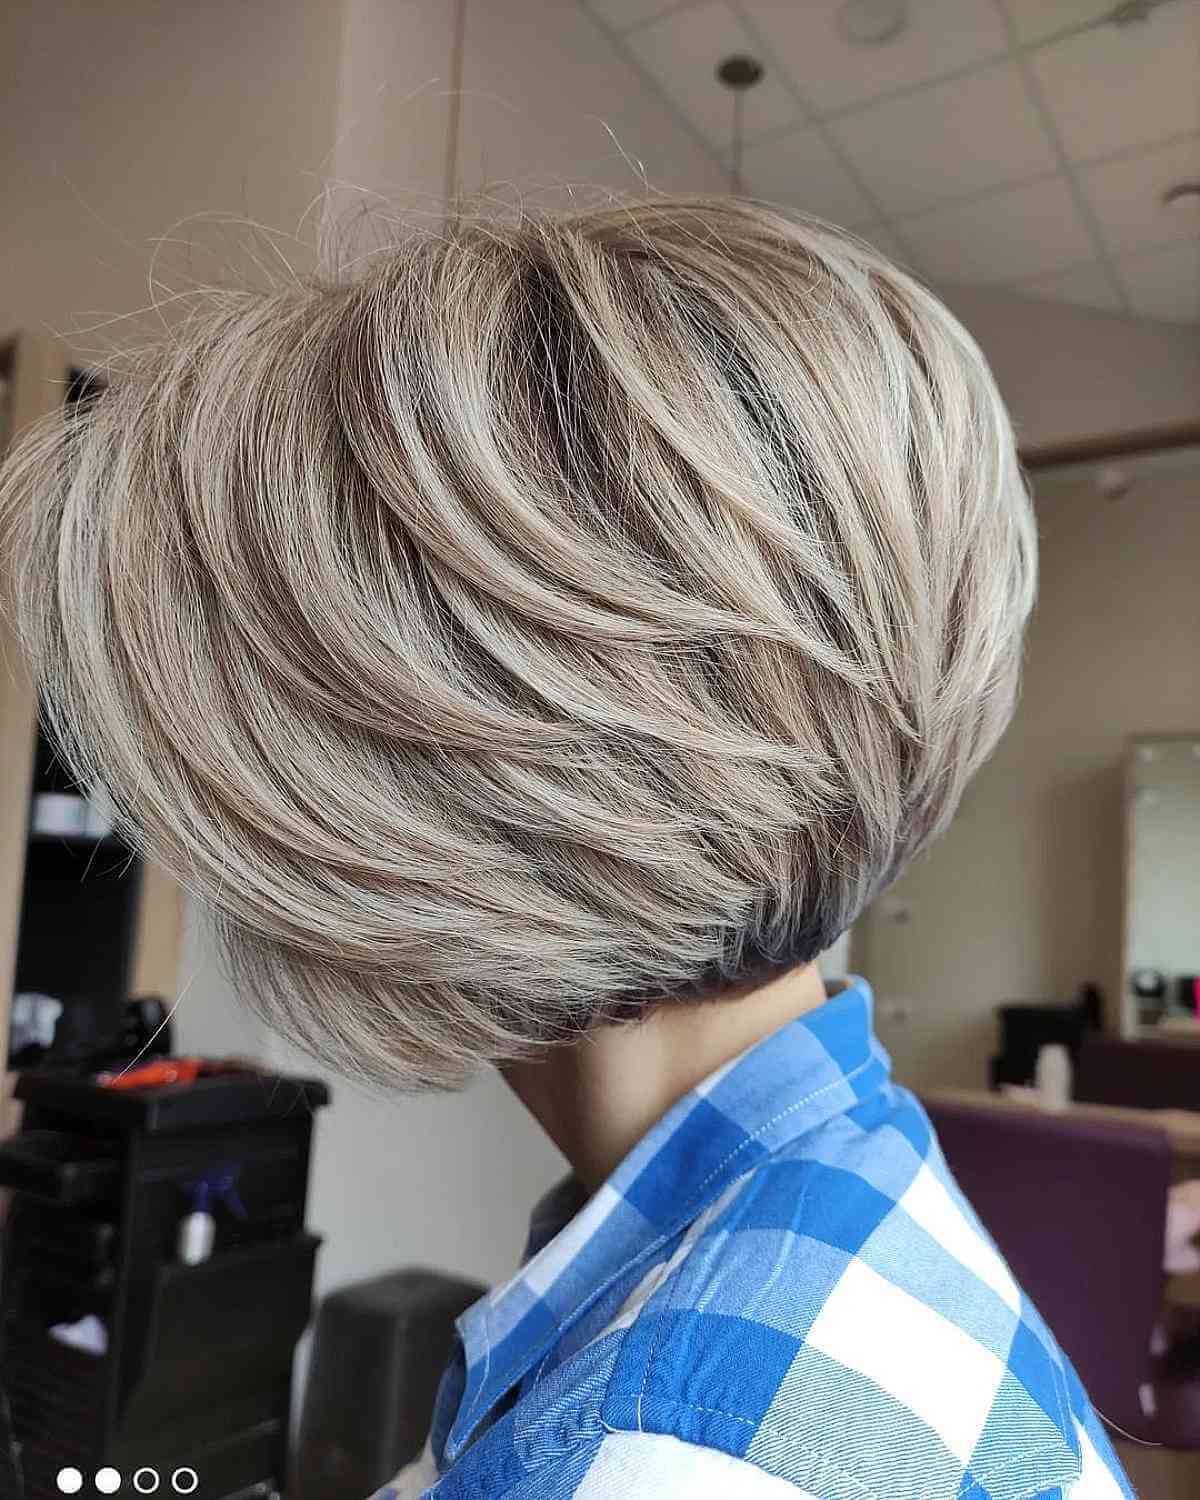 www.brit.co/media-library/hairstyles-to-keep-hair-...